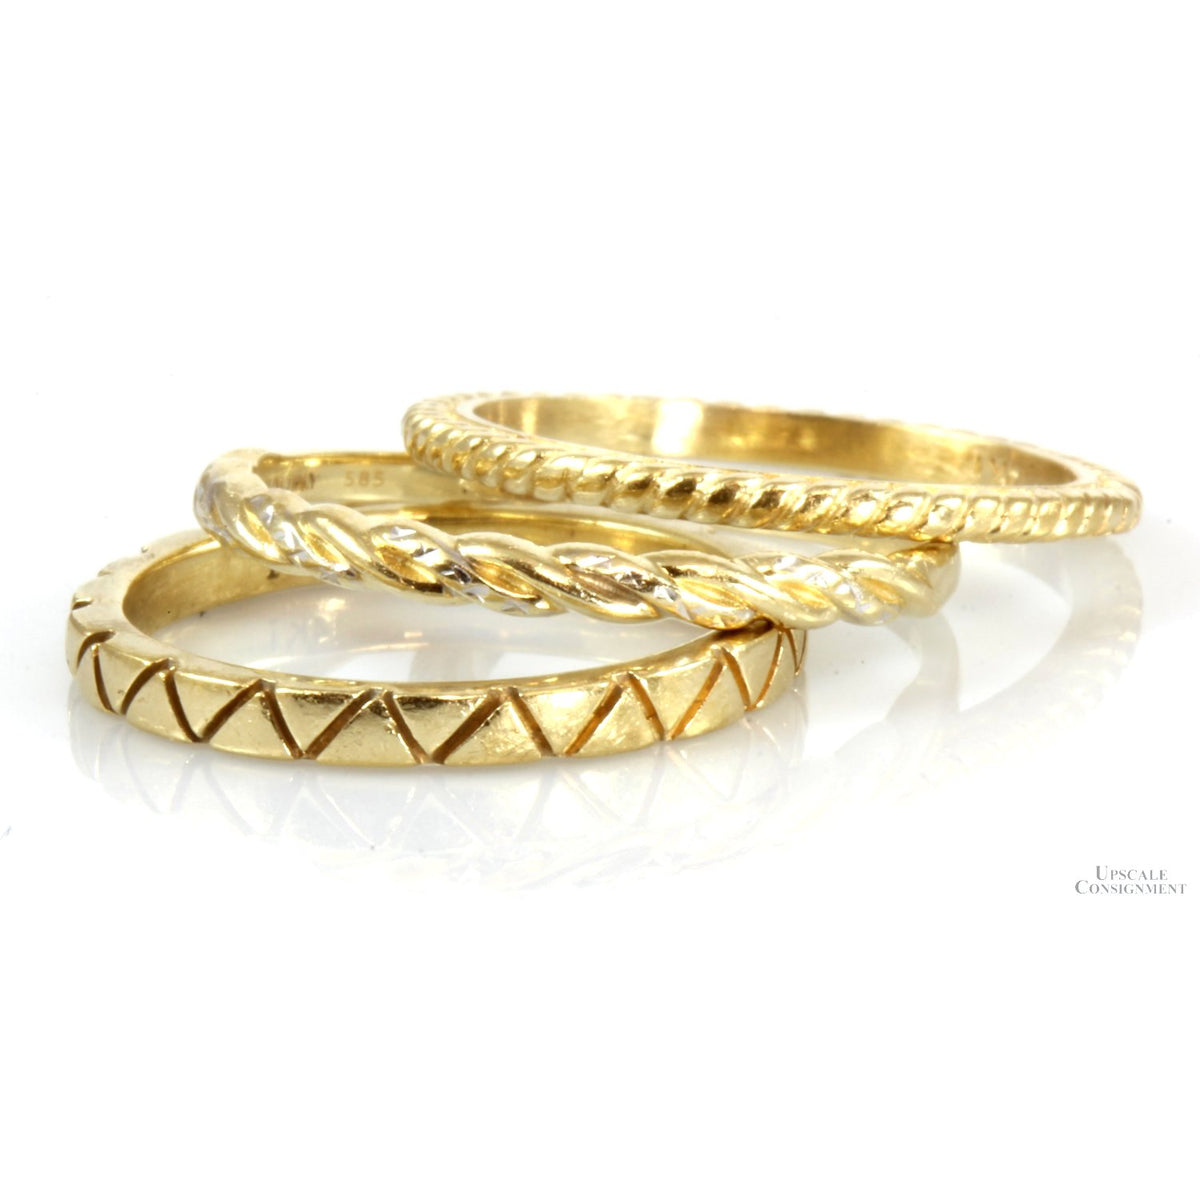 Set/3 14K Gold Stacking Rings - Ribbed, Braided & Chevon Designs